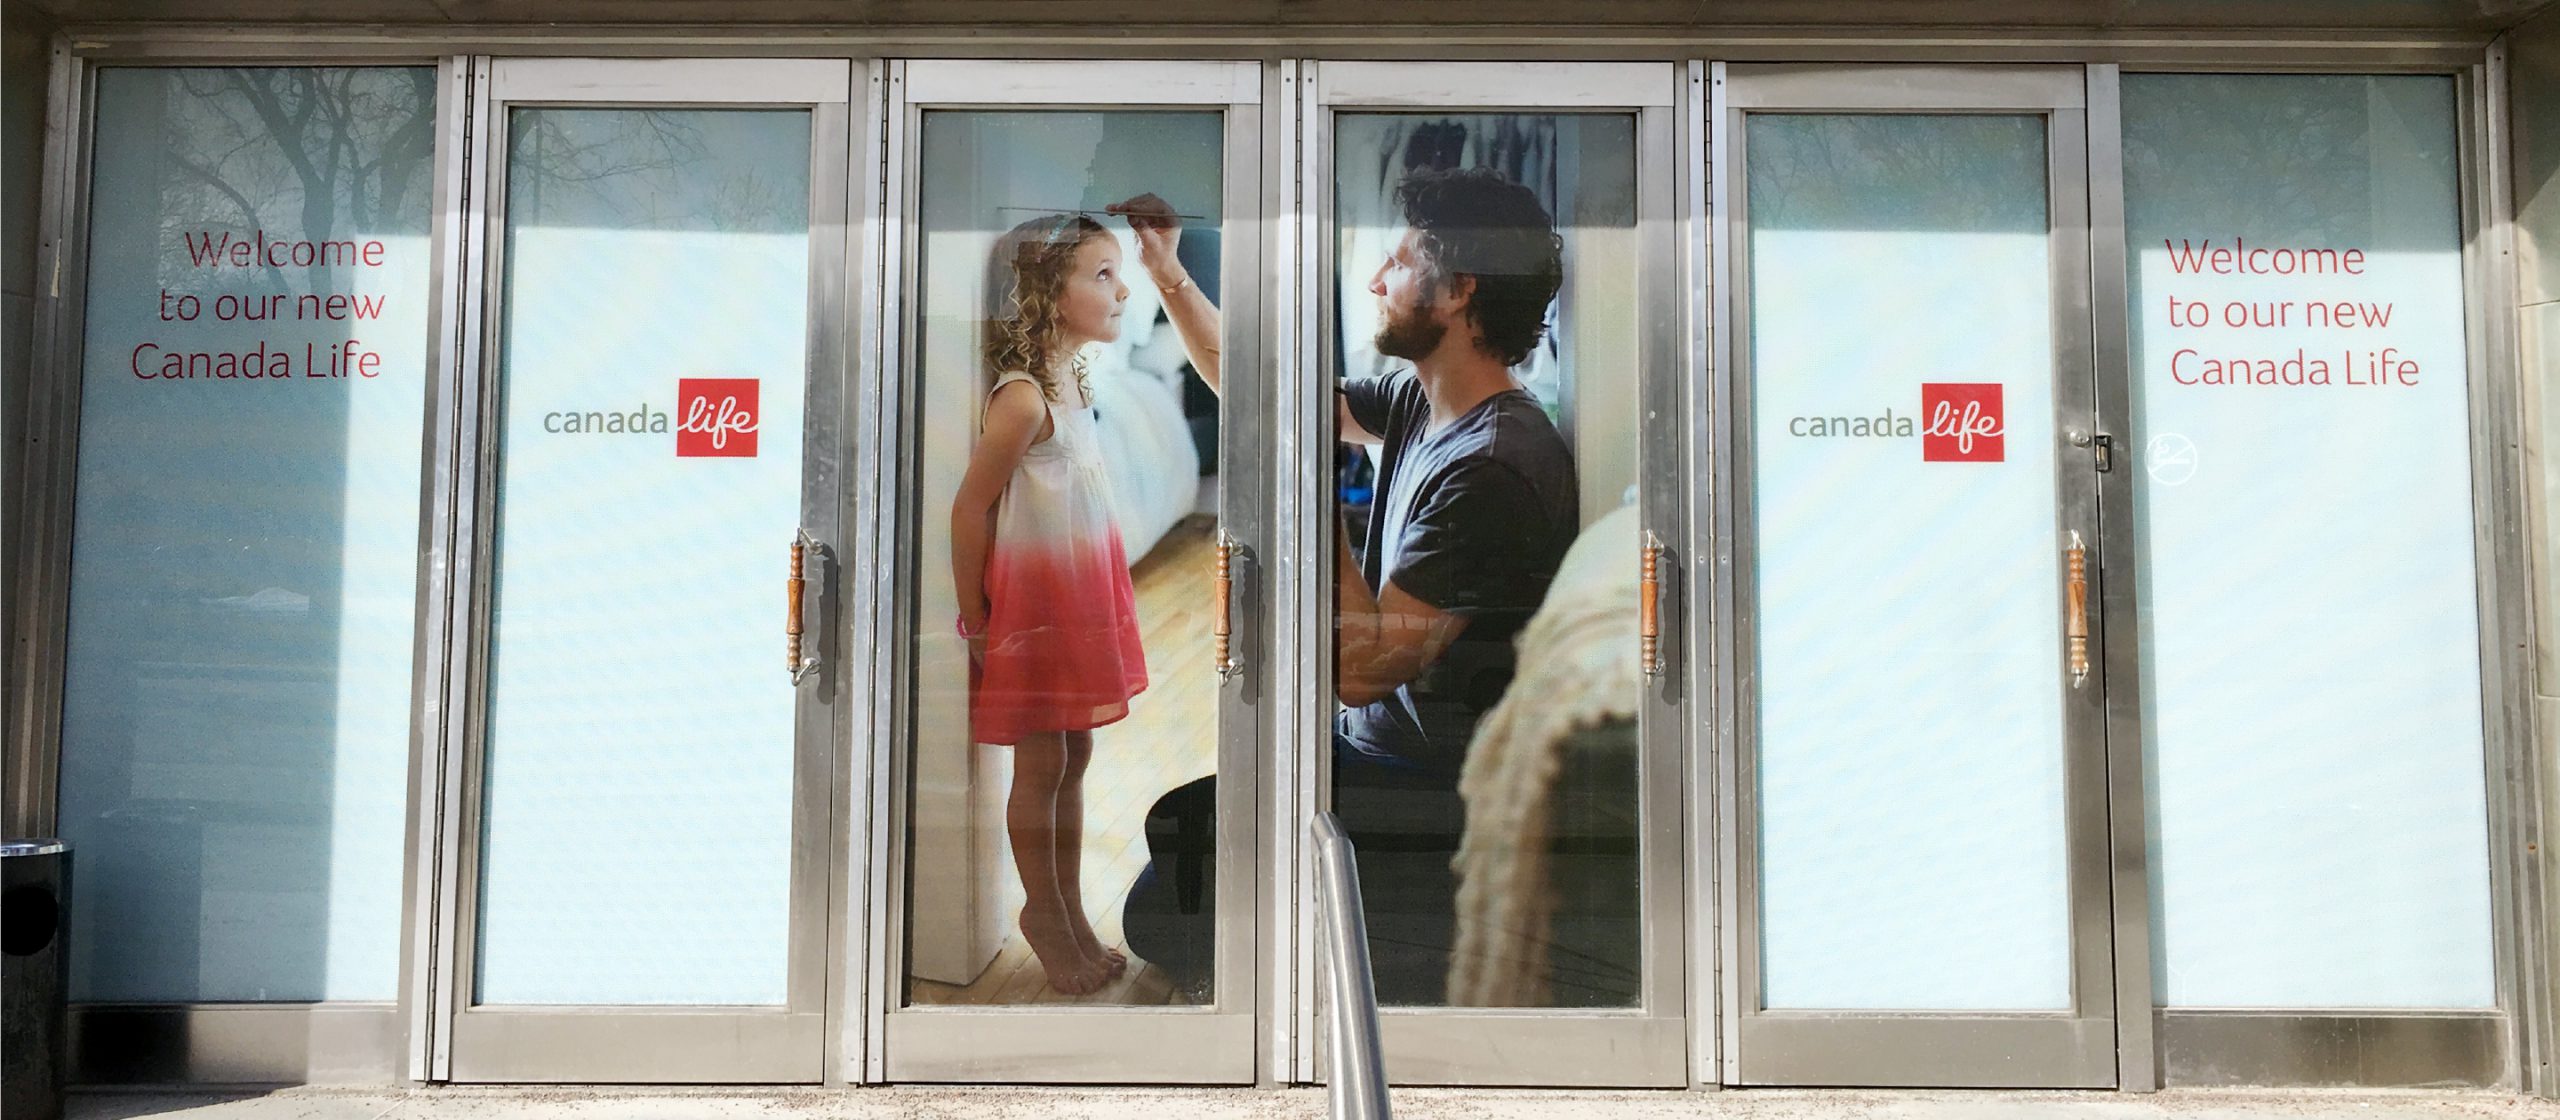 Photo of brand activation with brand visuals and messaging applied to entry doors of a Canada Life office location.